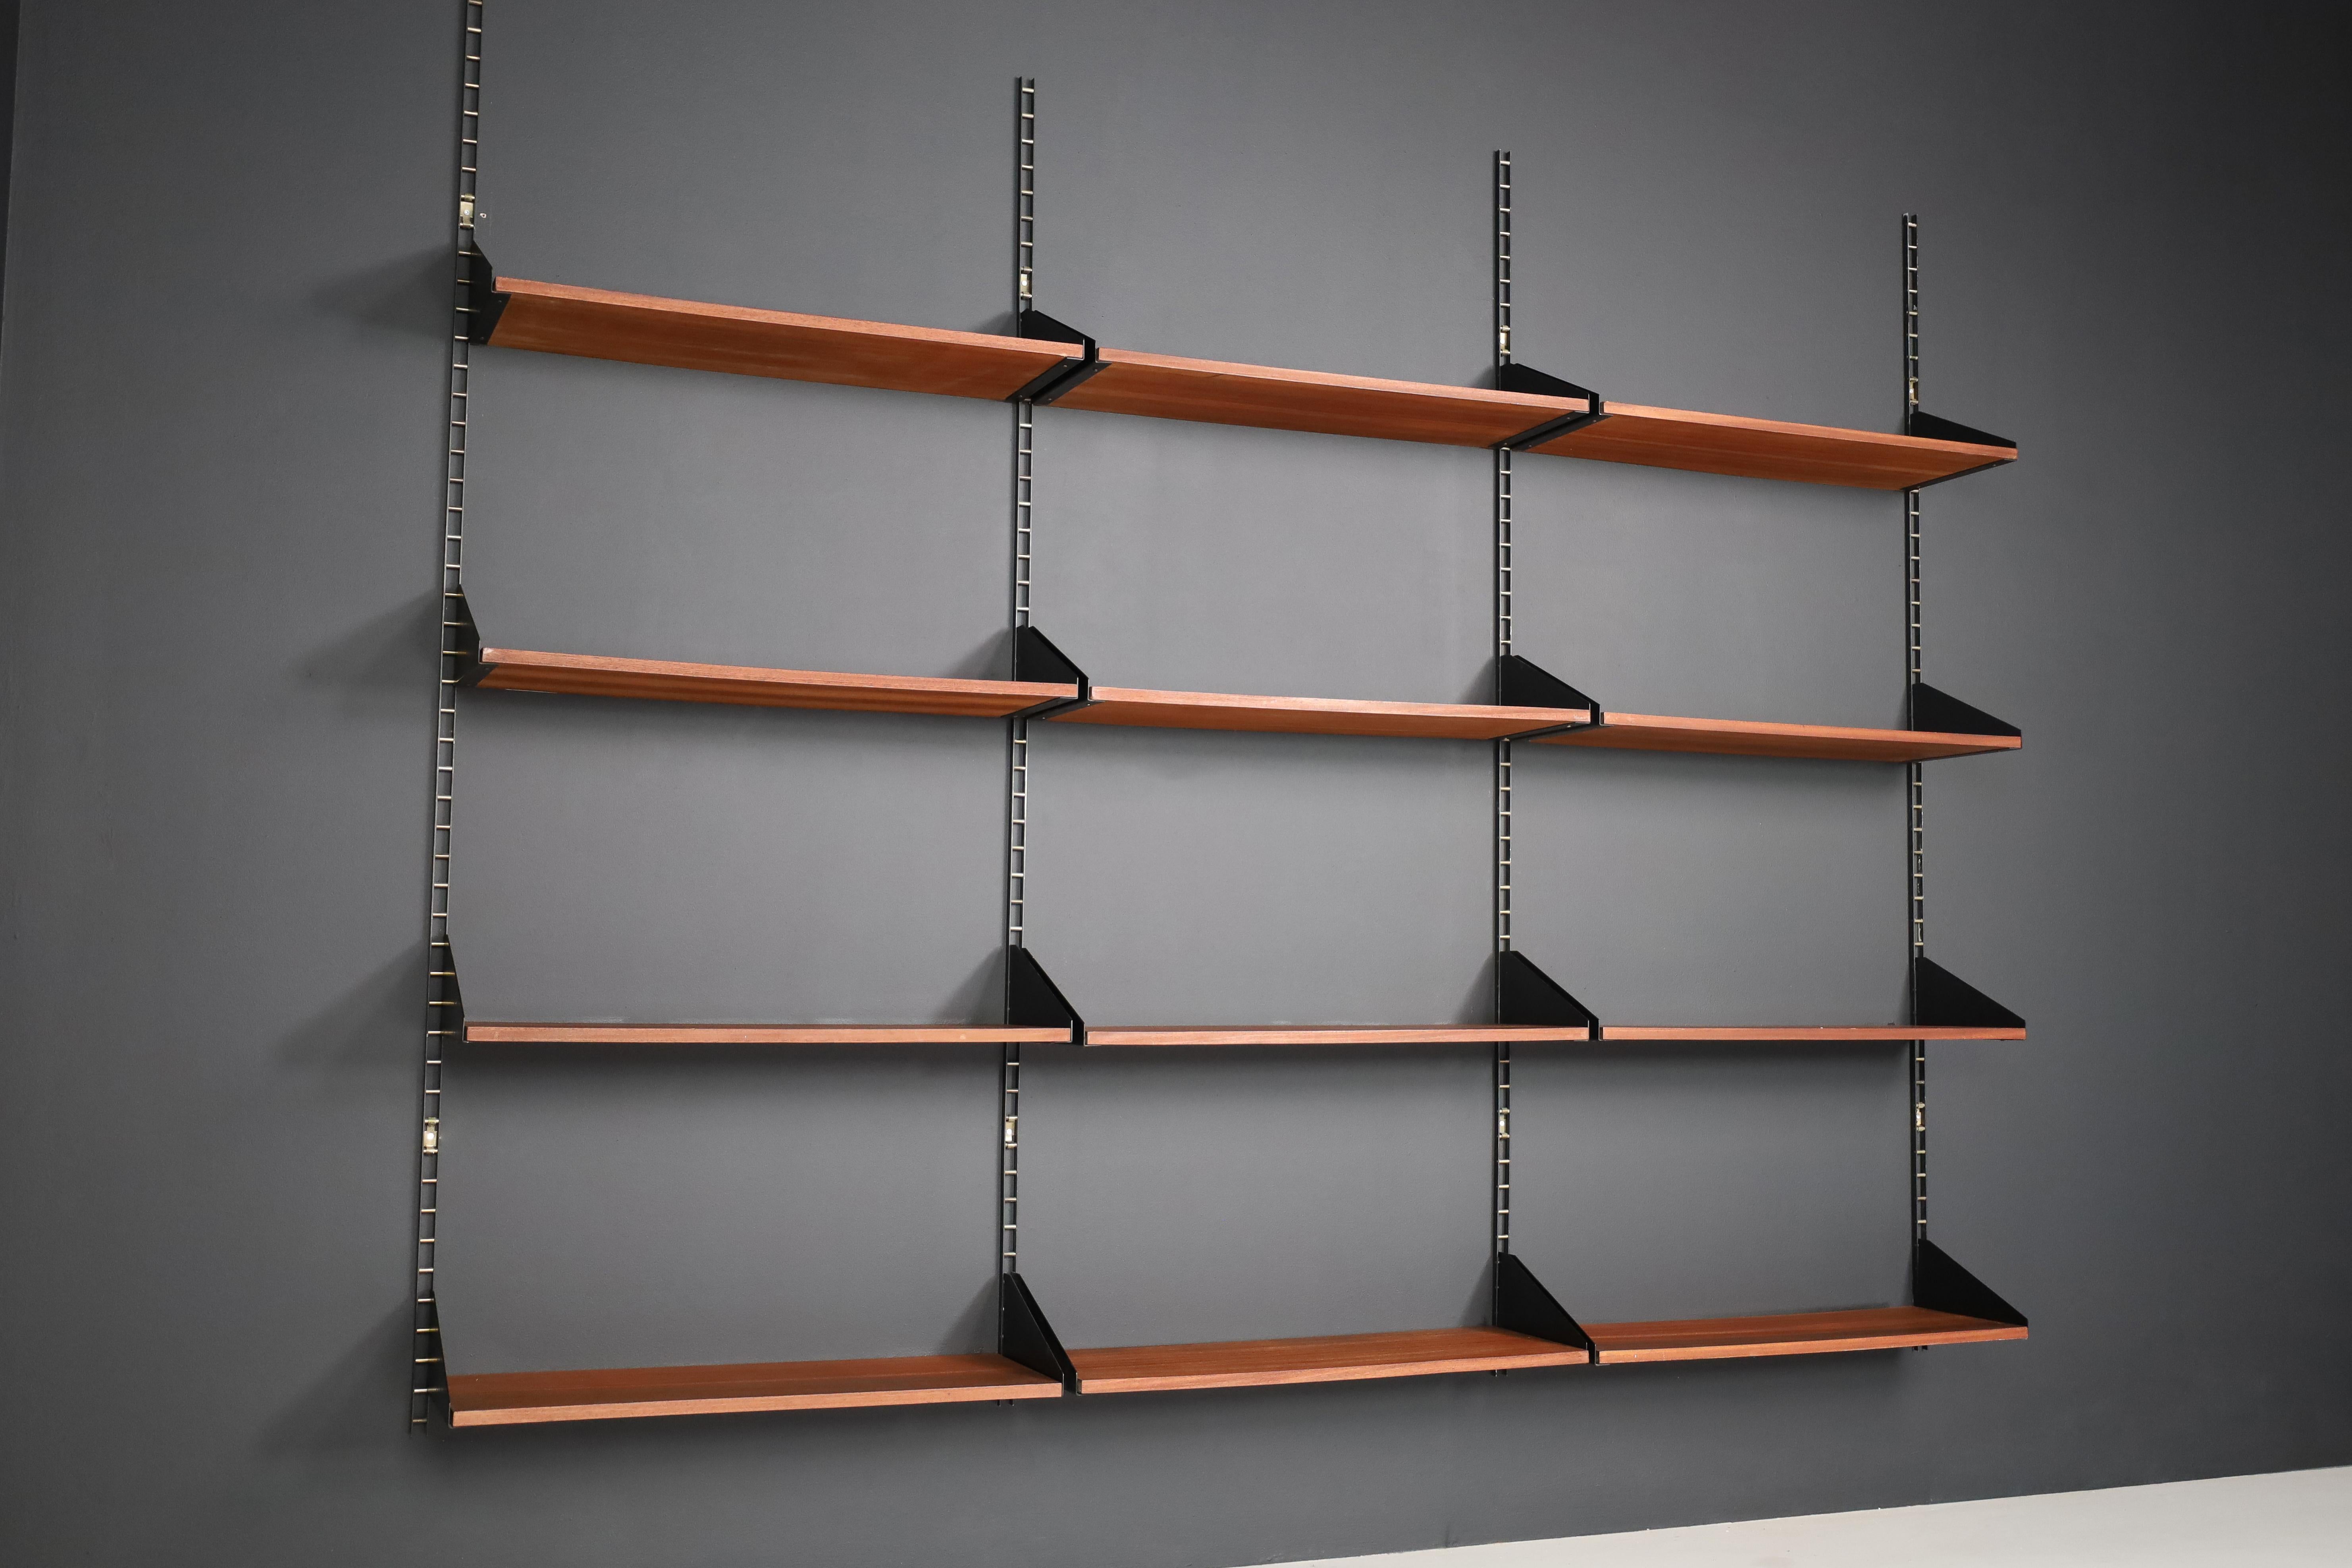 George Nelson Steel and Brass Wall Unit / Book Shelf USA 1960s

This is a George Nelson wall unit made of steel, Brass, and teak, designed in the 1960s in the United States. The shelves can be flexibly installed and are in excellent condition with